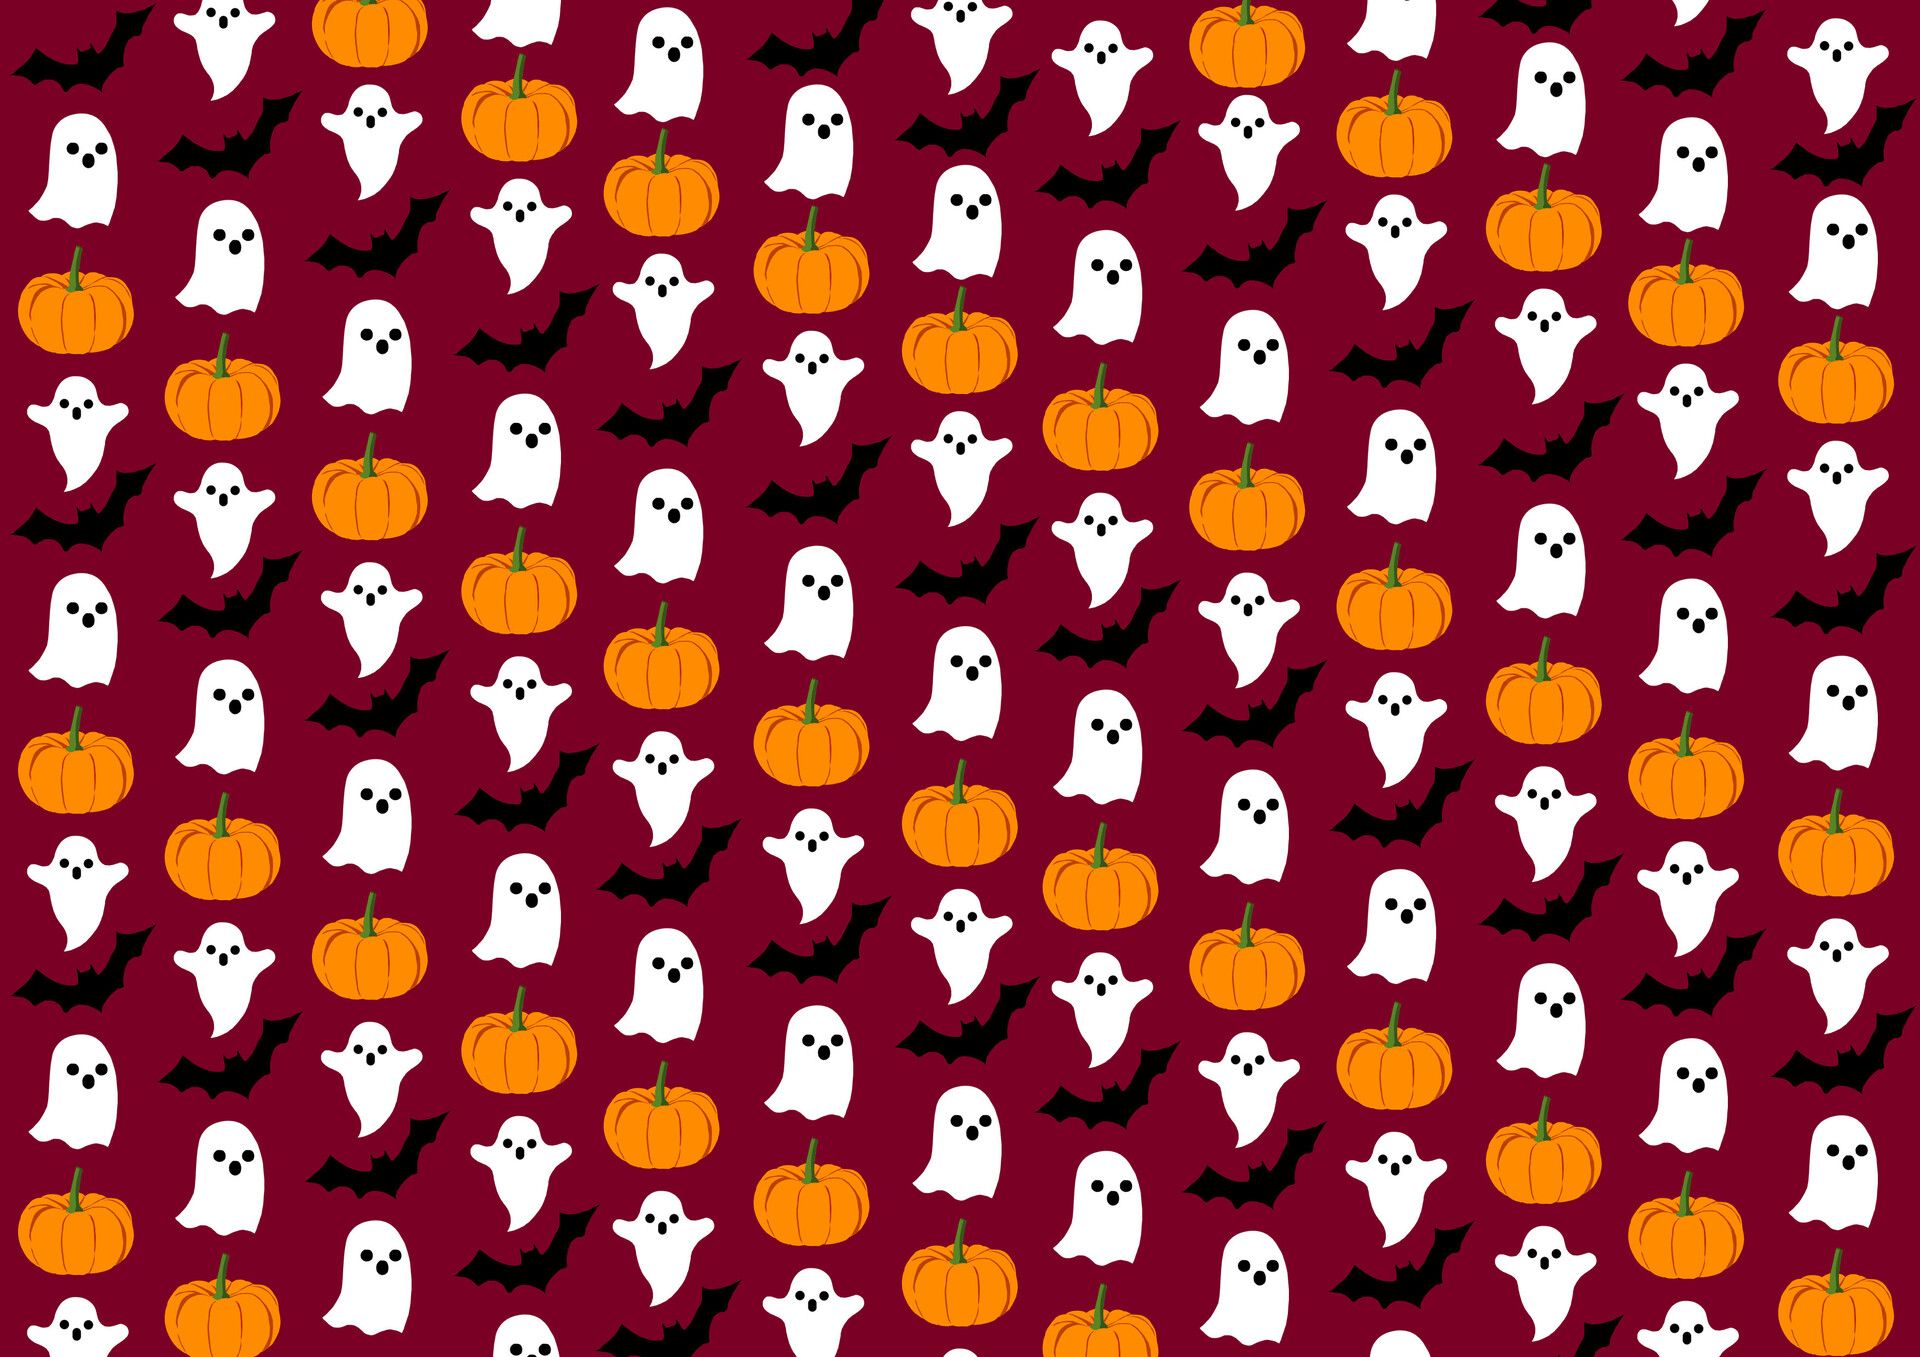 A pattern of ghosts, bats, and pumpkins on a red background. - Cute Halloween